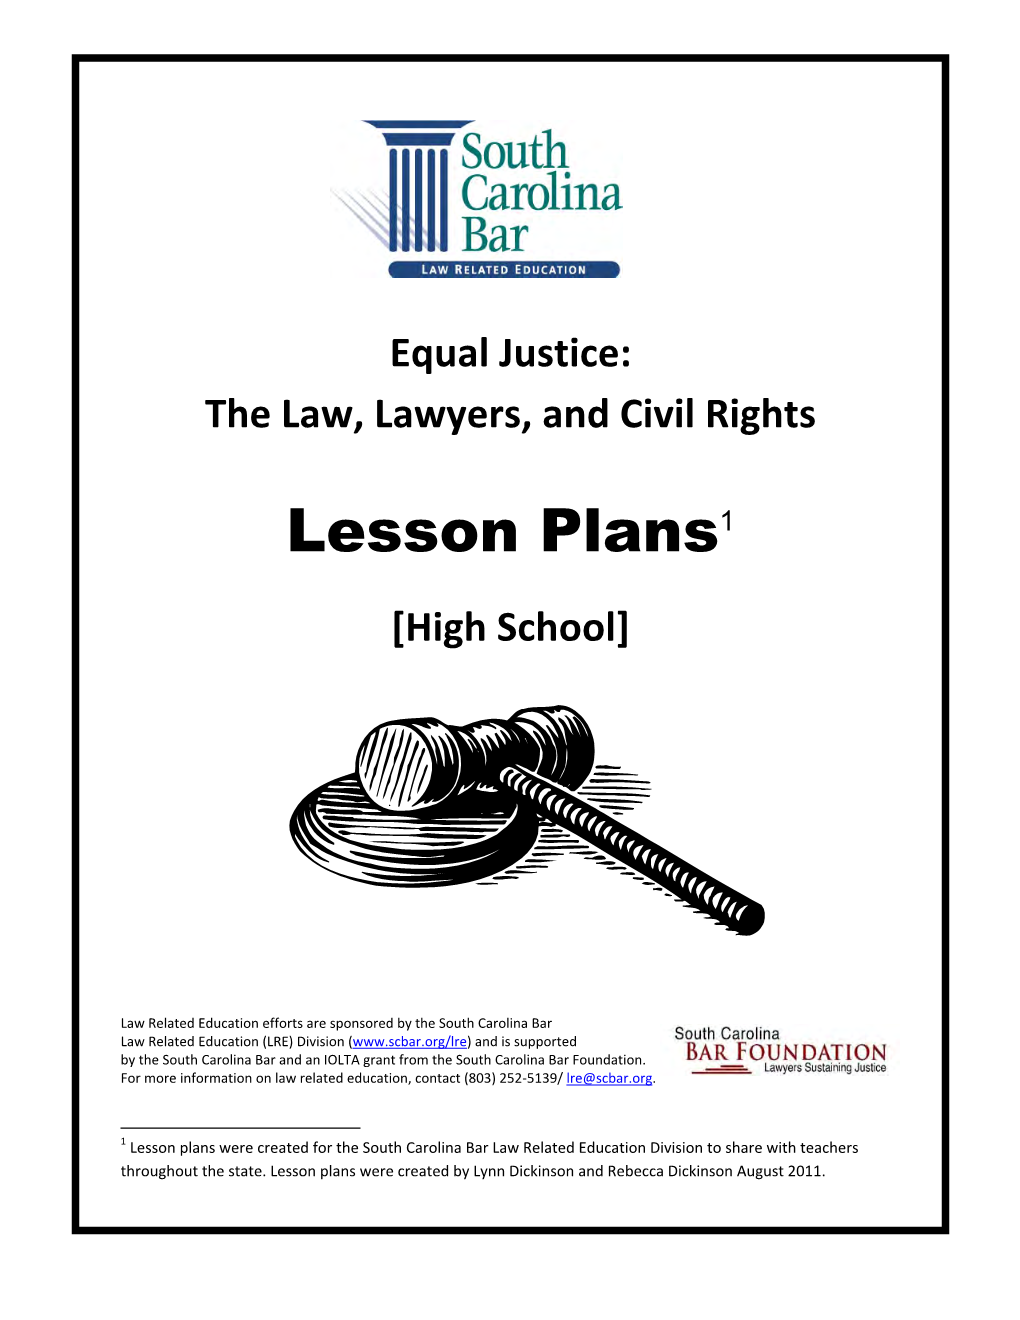 High School Lesson Plans: Body Biography Lesson Update of the Civil Rights Act Civil Rights Journalist Project Civil Rights Interview Project